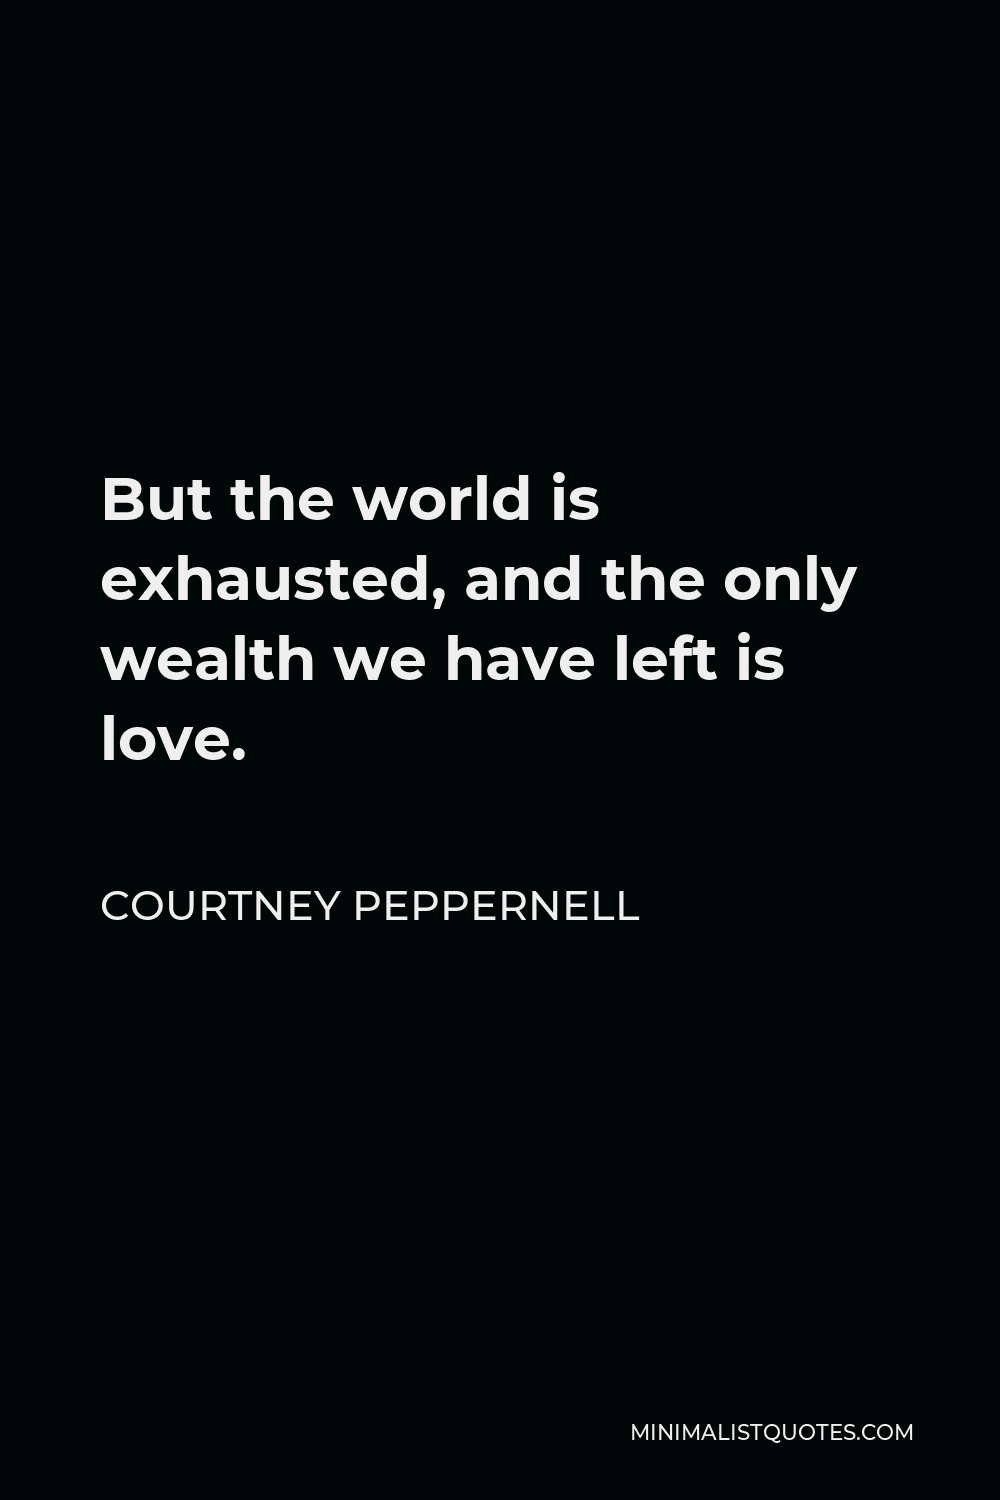 Courtney Peppernell Quote - But the world is exhausted, and the only wealth we have left is love.